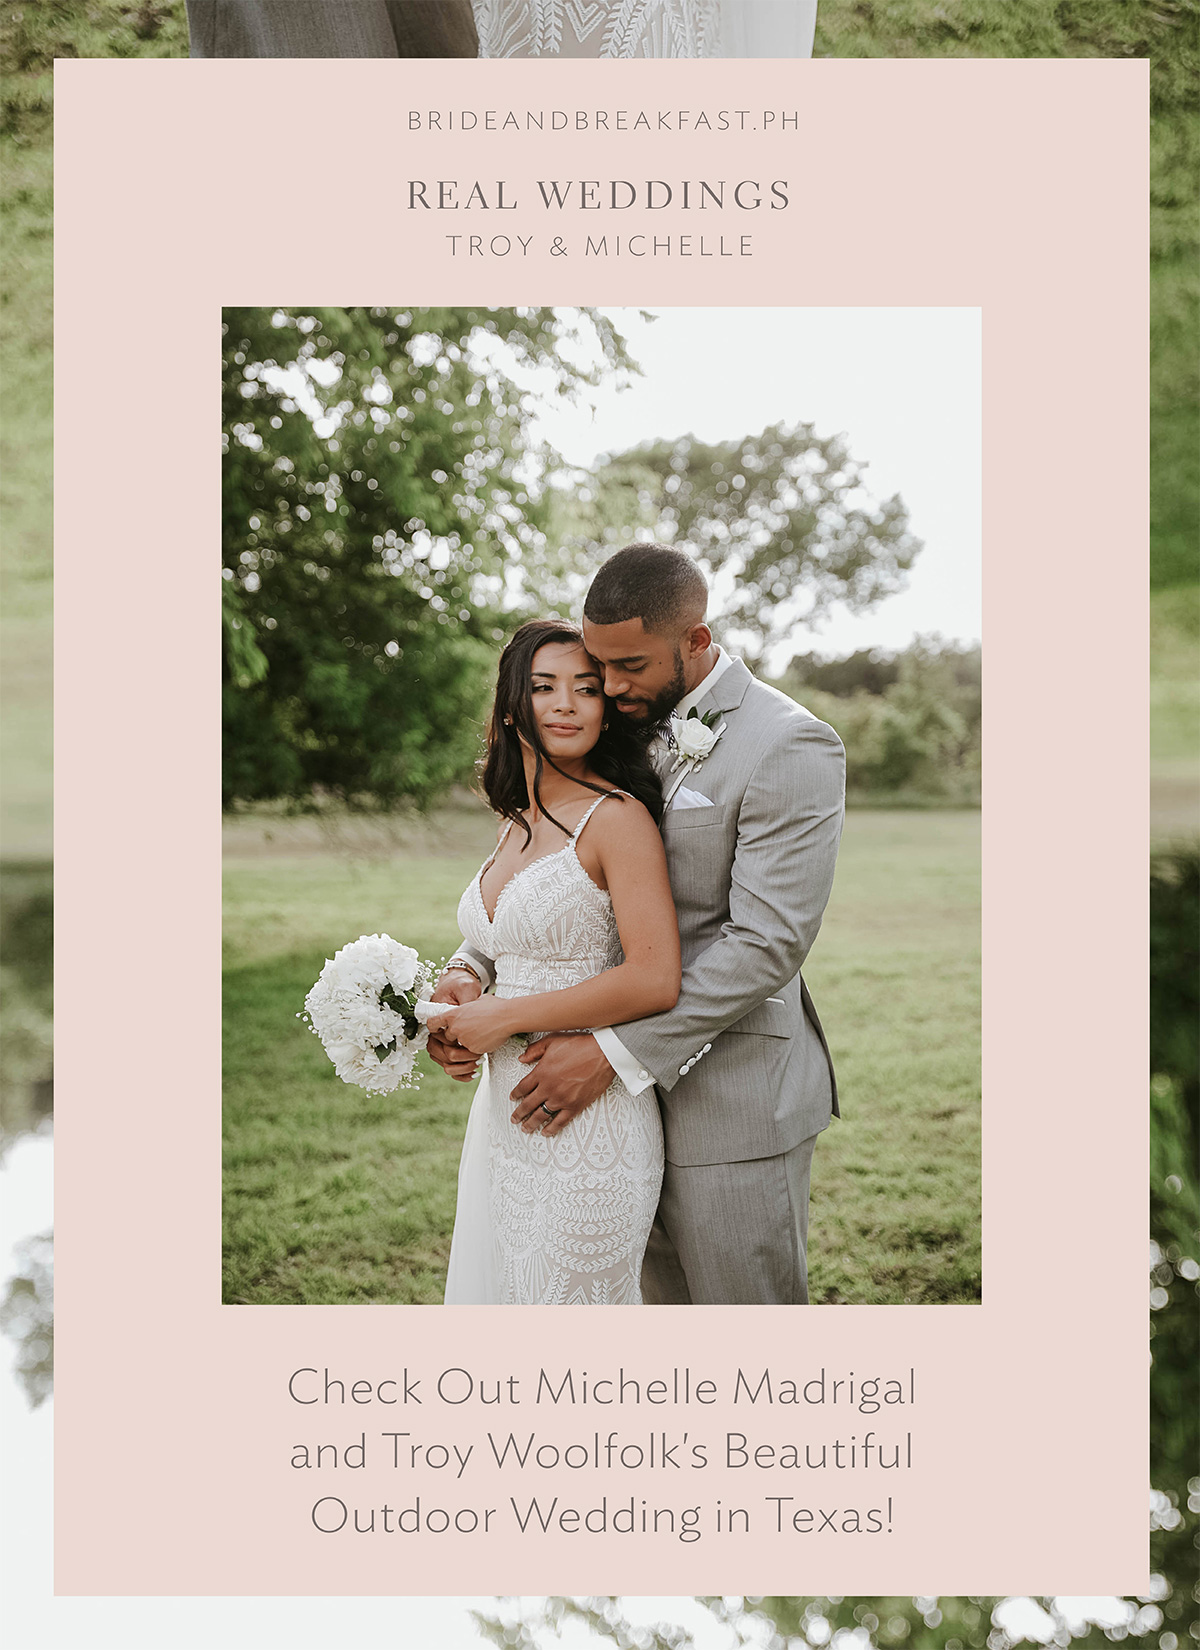 Check Out Michelle Madrigal and Troy Woolfolk's Beautiful Outdoor Wedding in Texas!